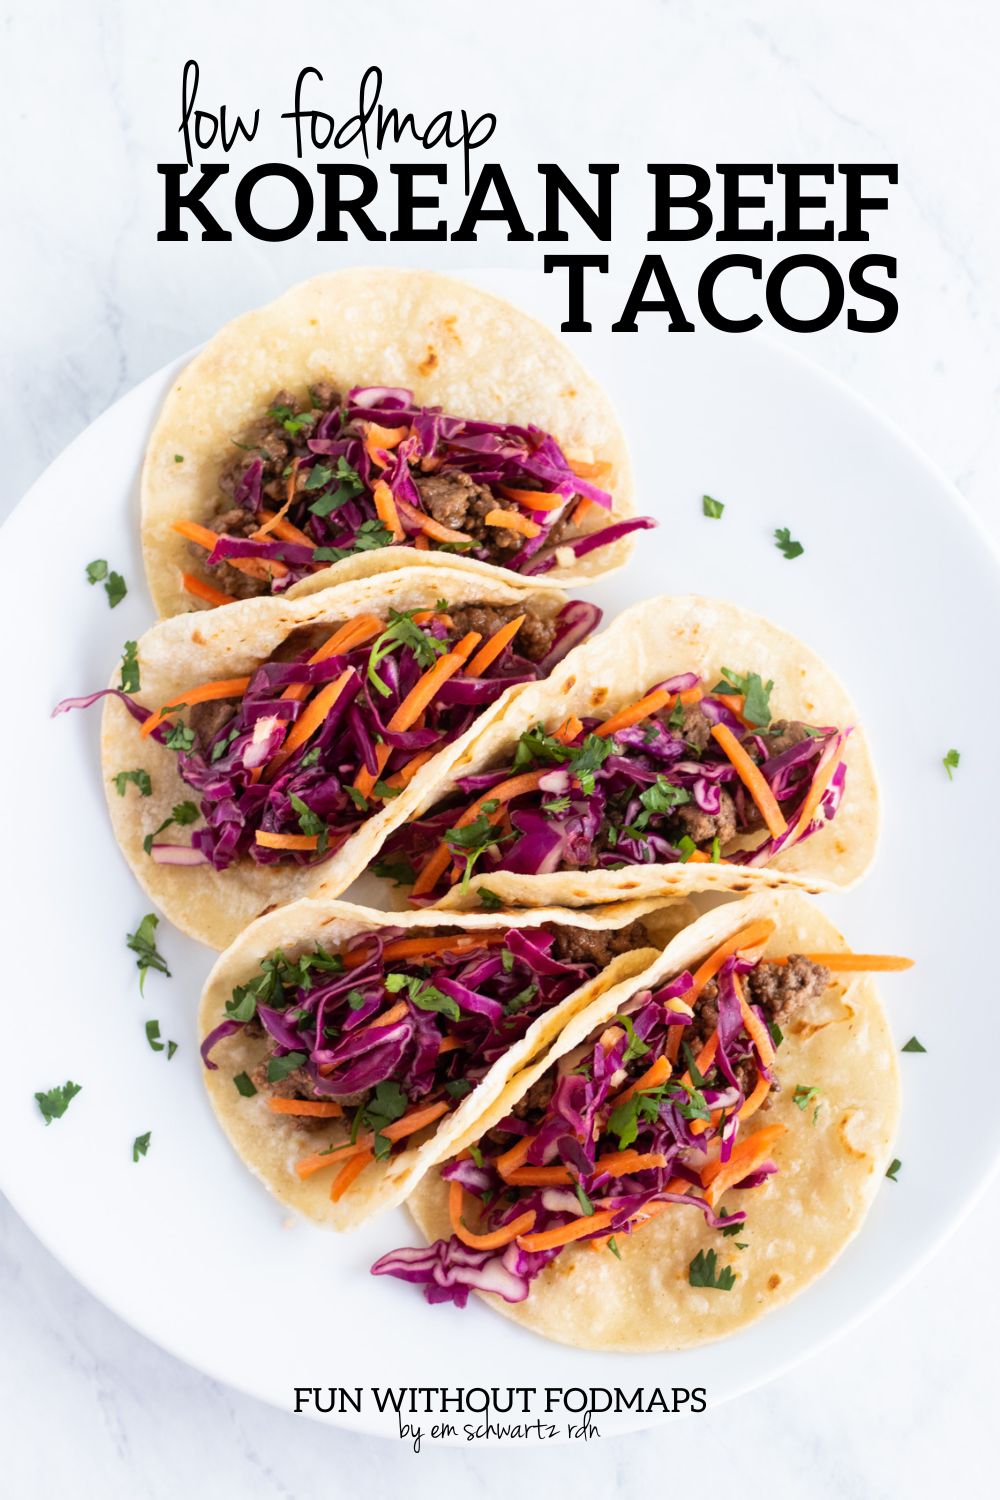 A plate of five corn tortilla tacos filled with ground beef and pickled carrots and red cabbage. In the white space above, black text reads "Low FODMAP Korean Beef Tacos".